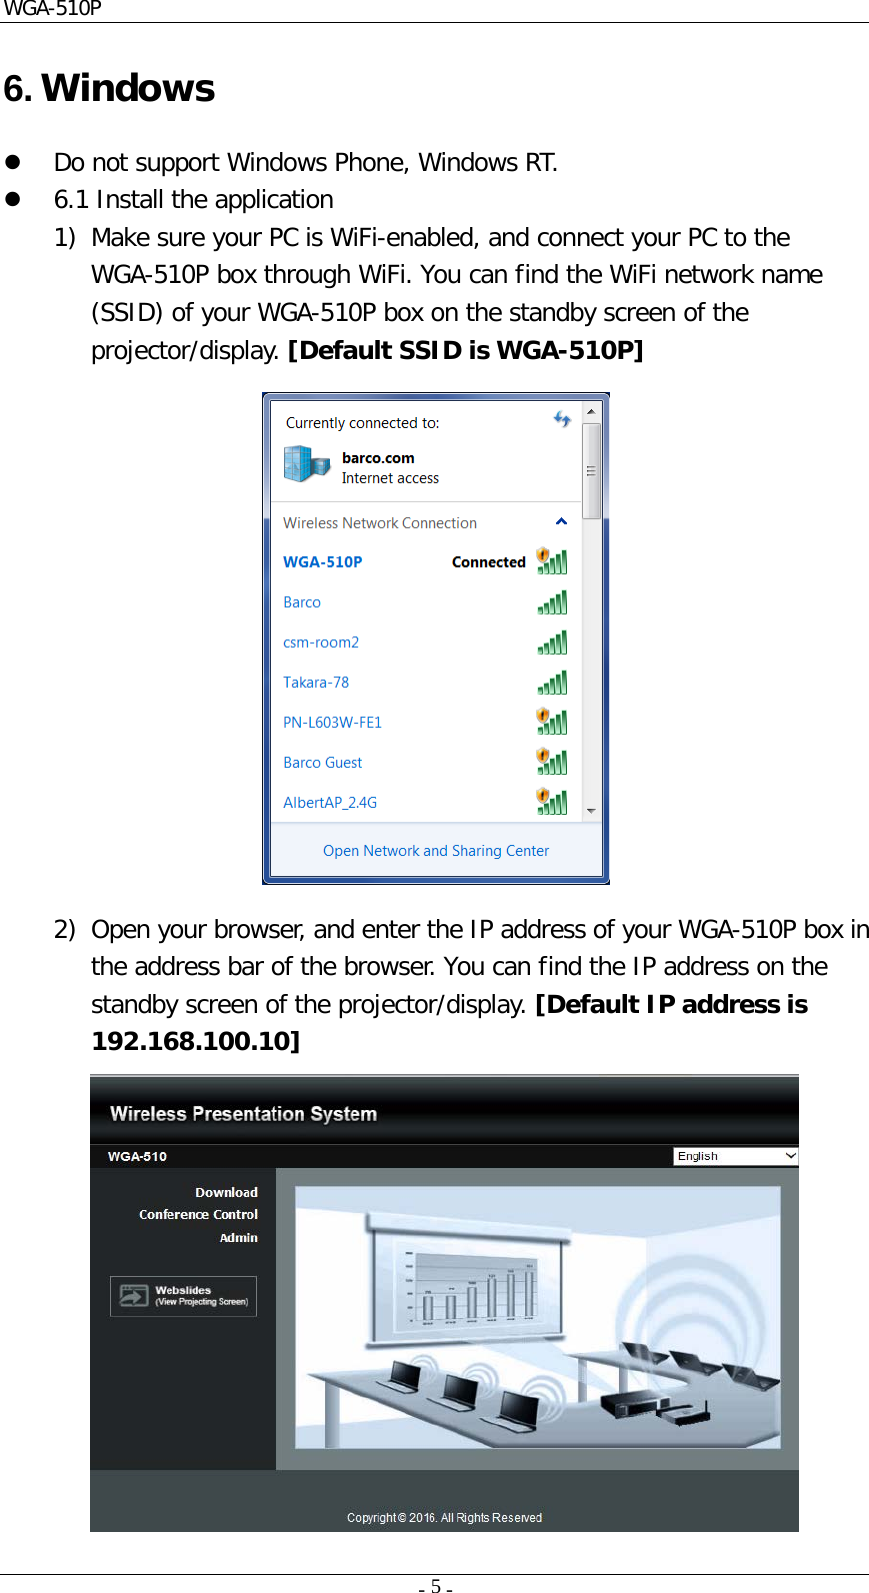 WGA-510P     -    -  5  6. Windows  Do not support Windows Phone, Windows RT.   6.1 Install the application 1) Make sure your PC is WiFi-enabled, and connect your PC to the WGA-510P box through WiFi. You can find the WiFi network name (SSID) of your WGA-510P box on the standby screen of the projector/display. [Default SSID is WGA-510P]    2) Open your browser, and enter the IP address of your WGA-510P box in the address bar of the browser. You can find the IP address on the standby screen of the projector/display. [Default IP address is 192.168.100.10]  